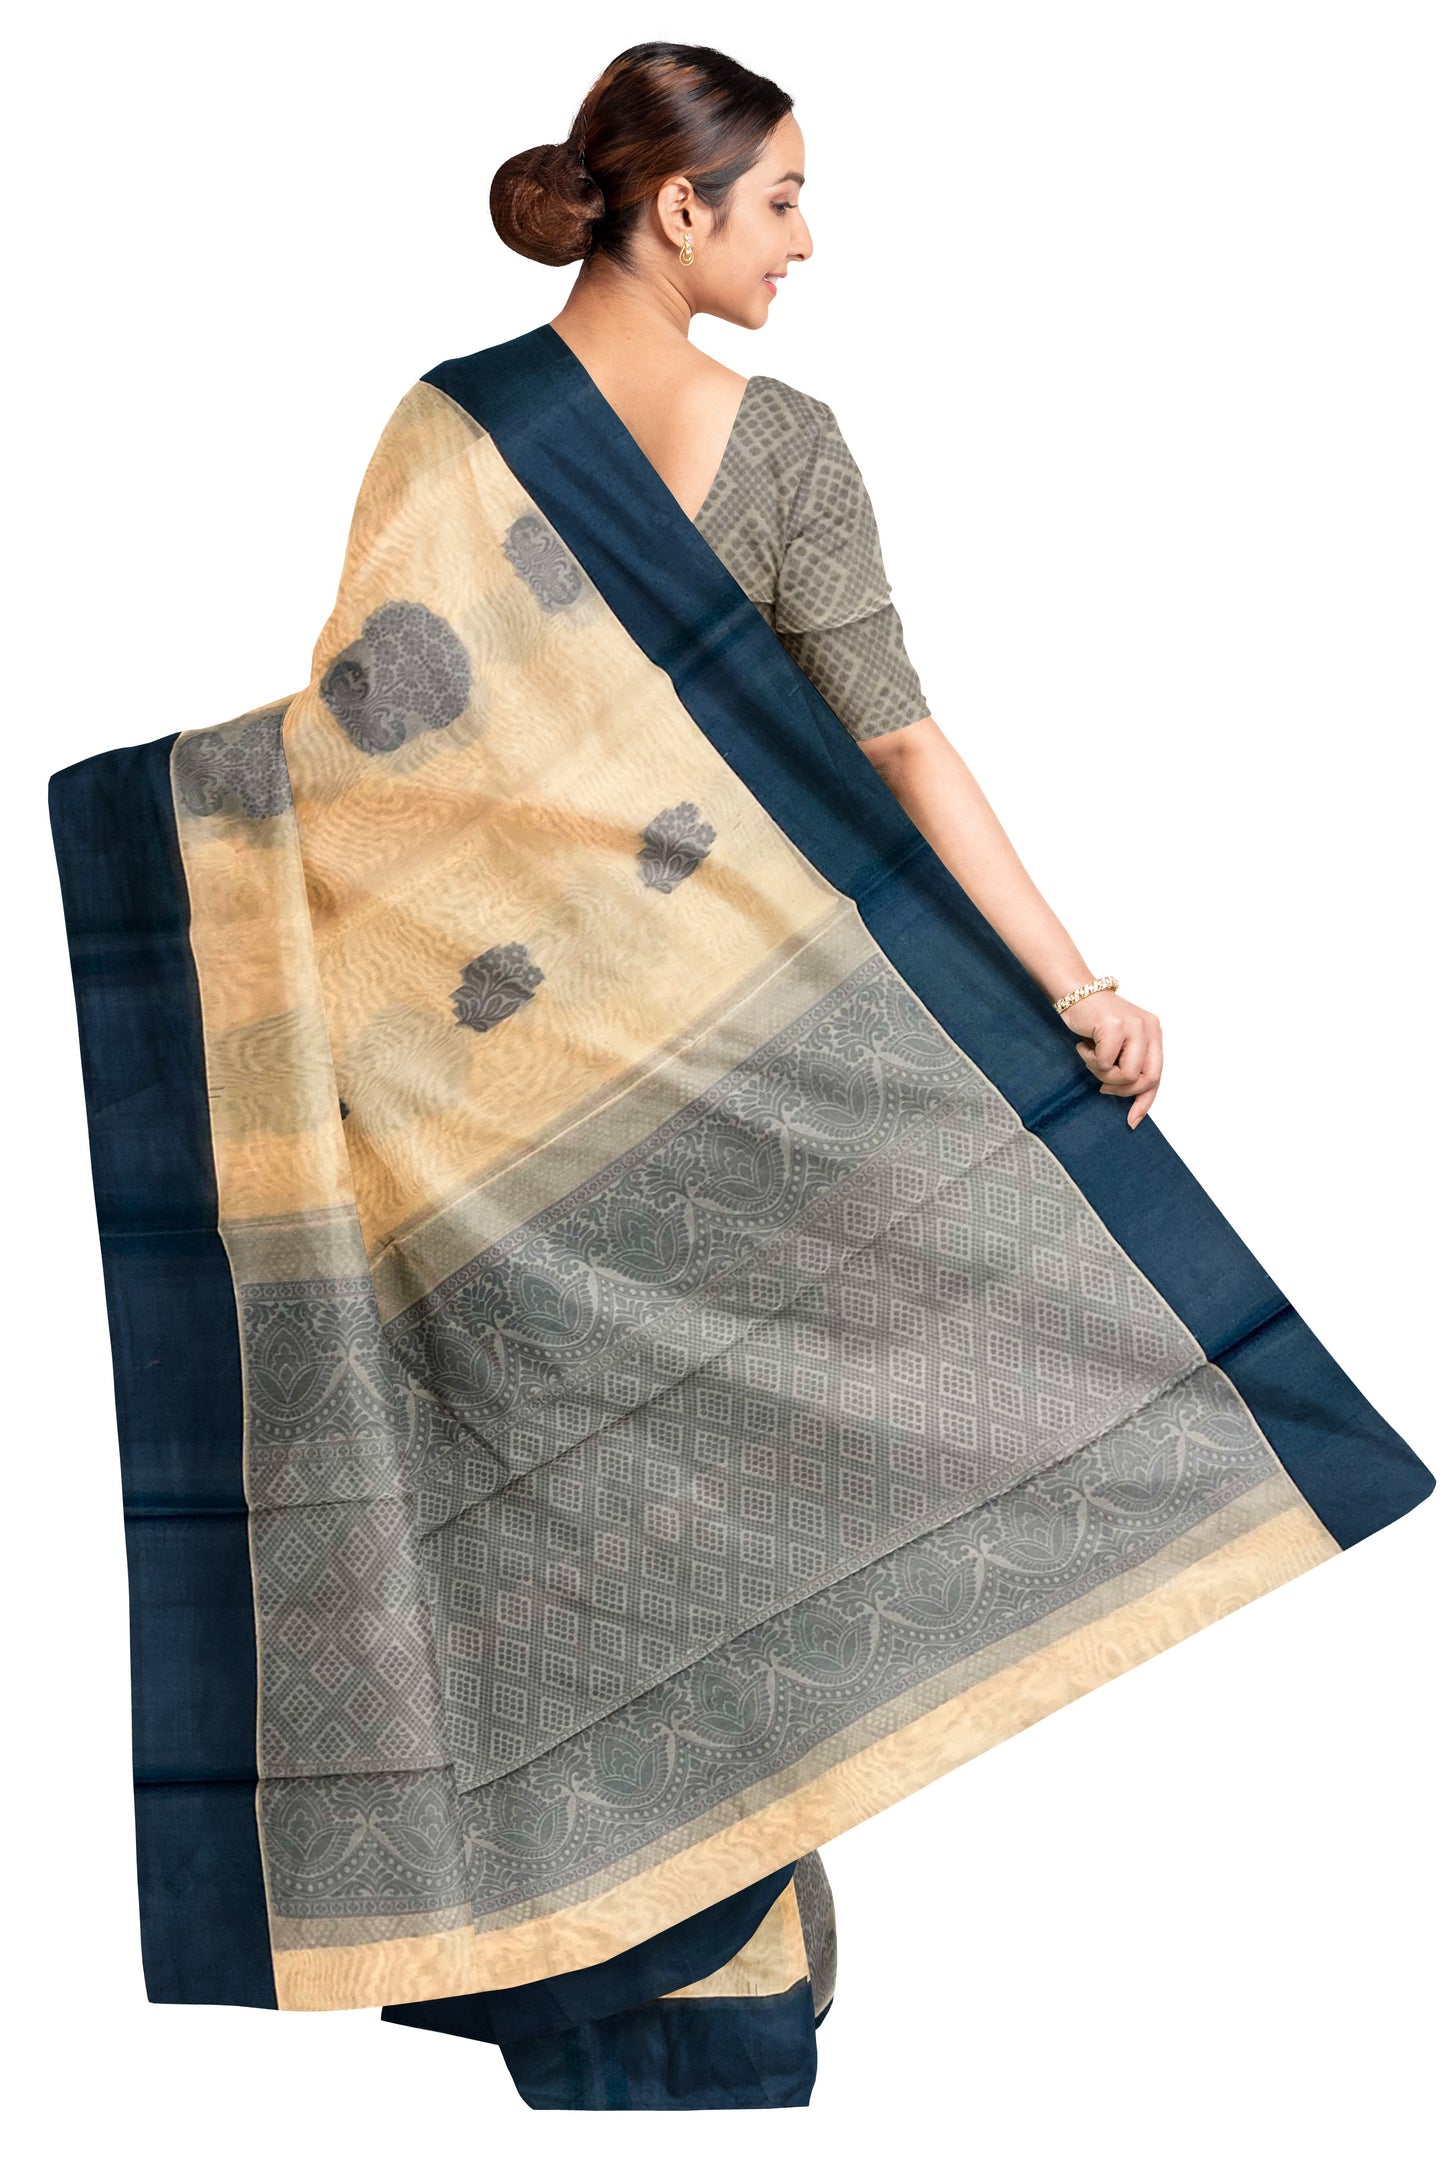 Southloom Sico Gadwal Semi Silk Saree in Cream and Dark Blue with Floral Motifs (Blouse Piece with Work)